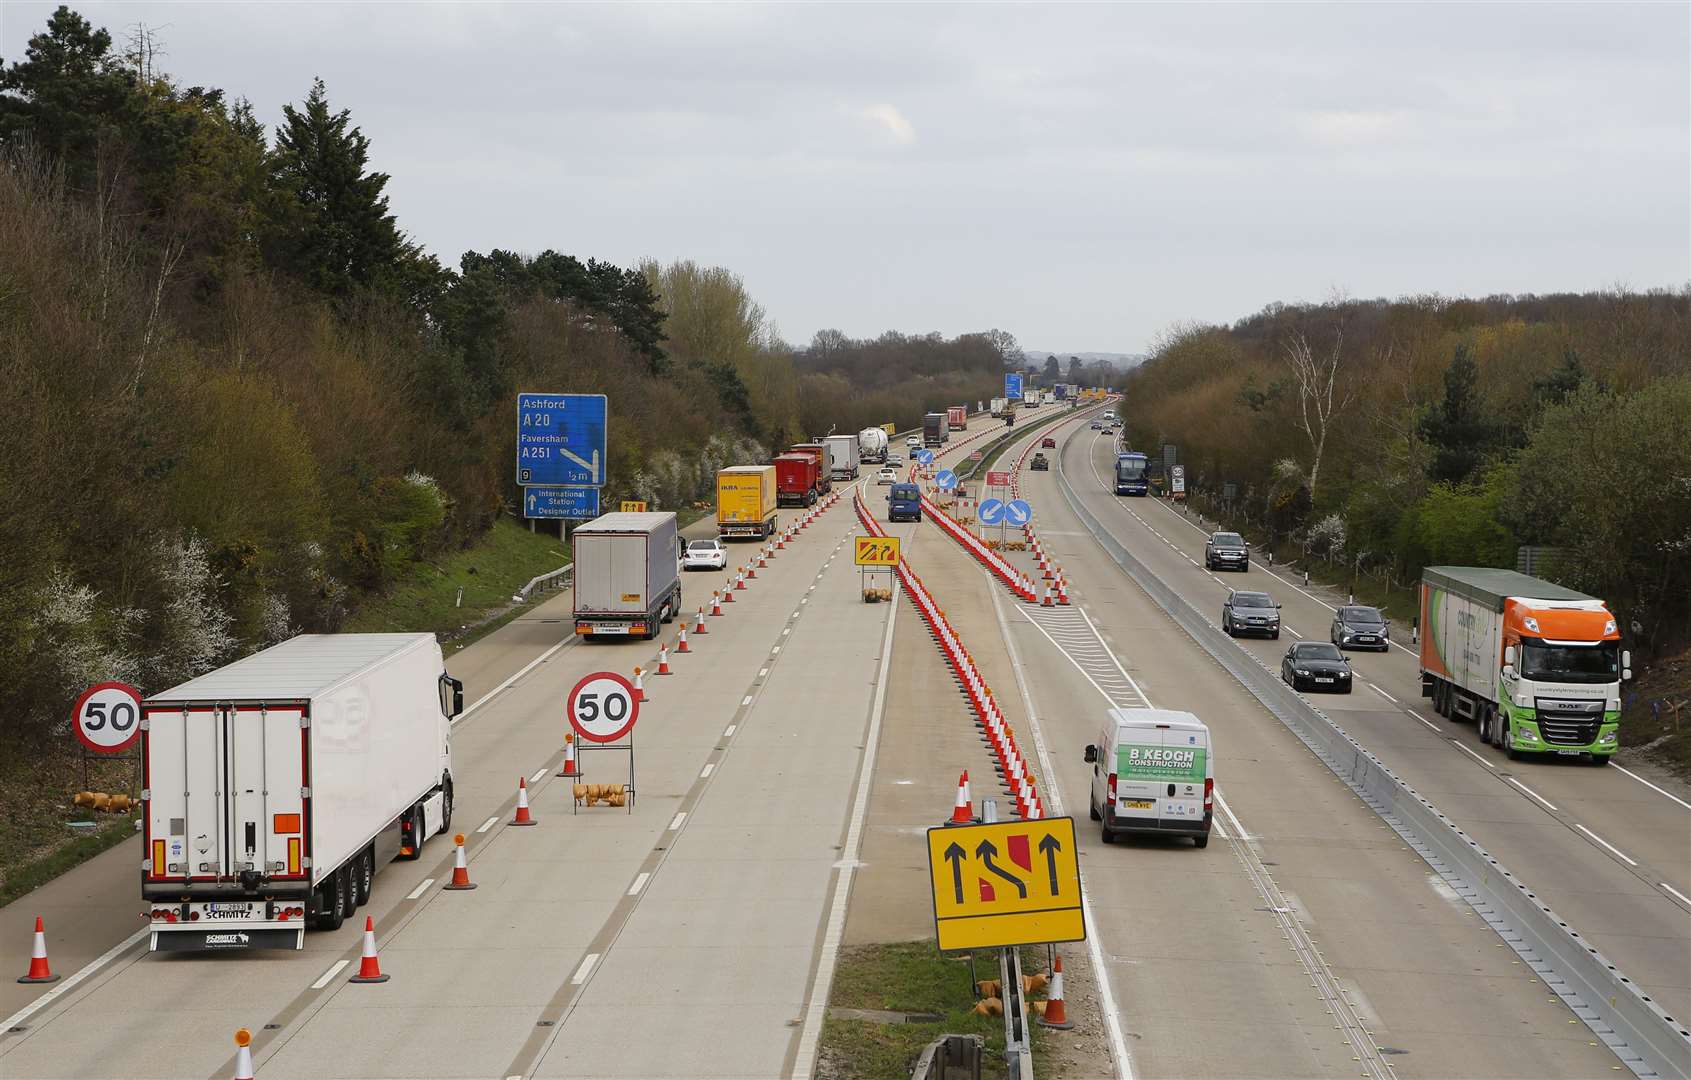 Operation Brock in place on M20 between junctions 8 & 9